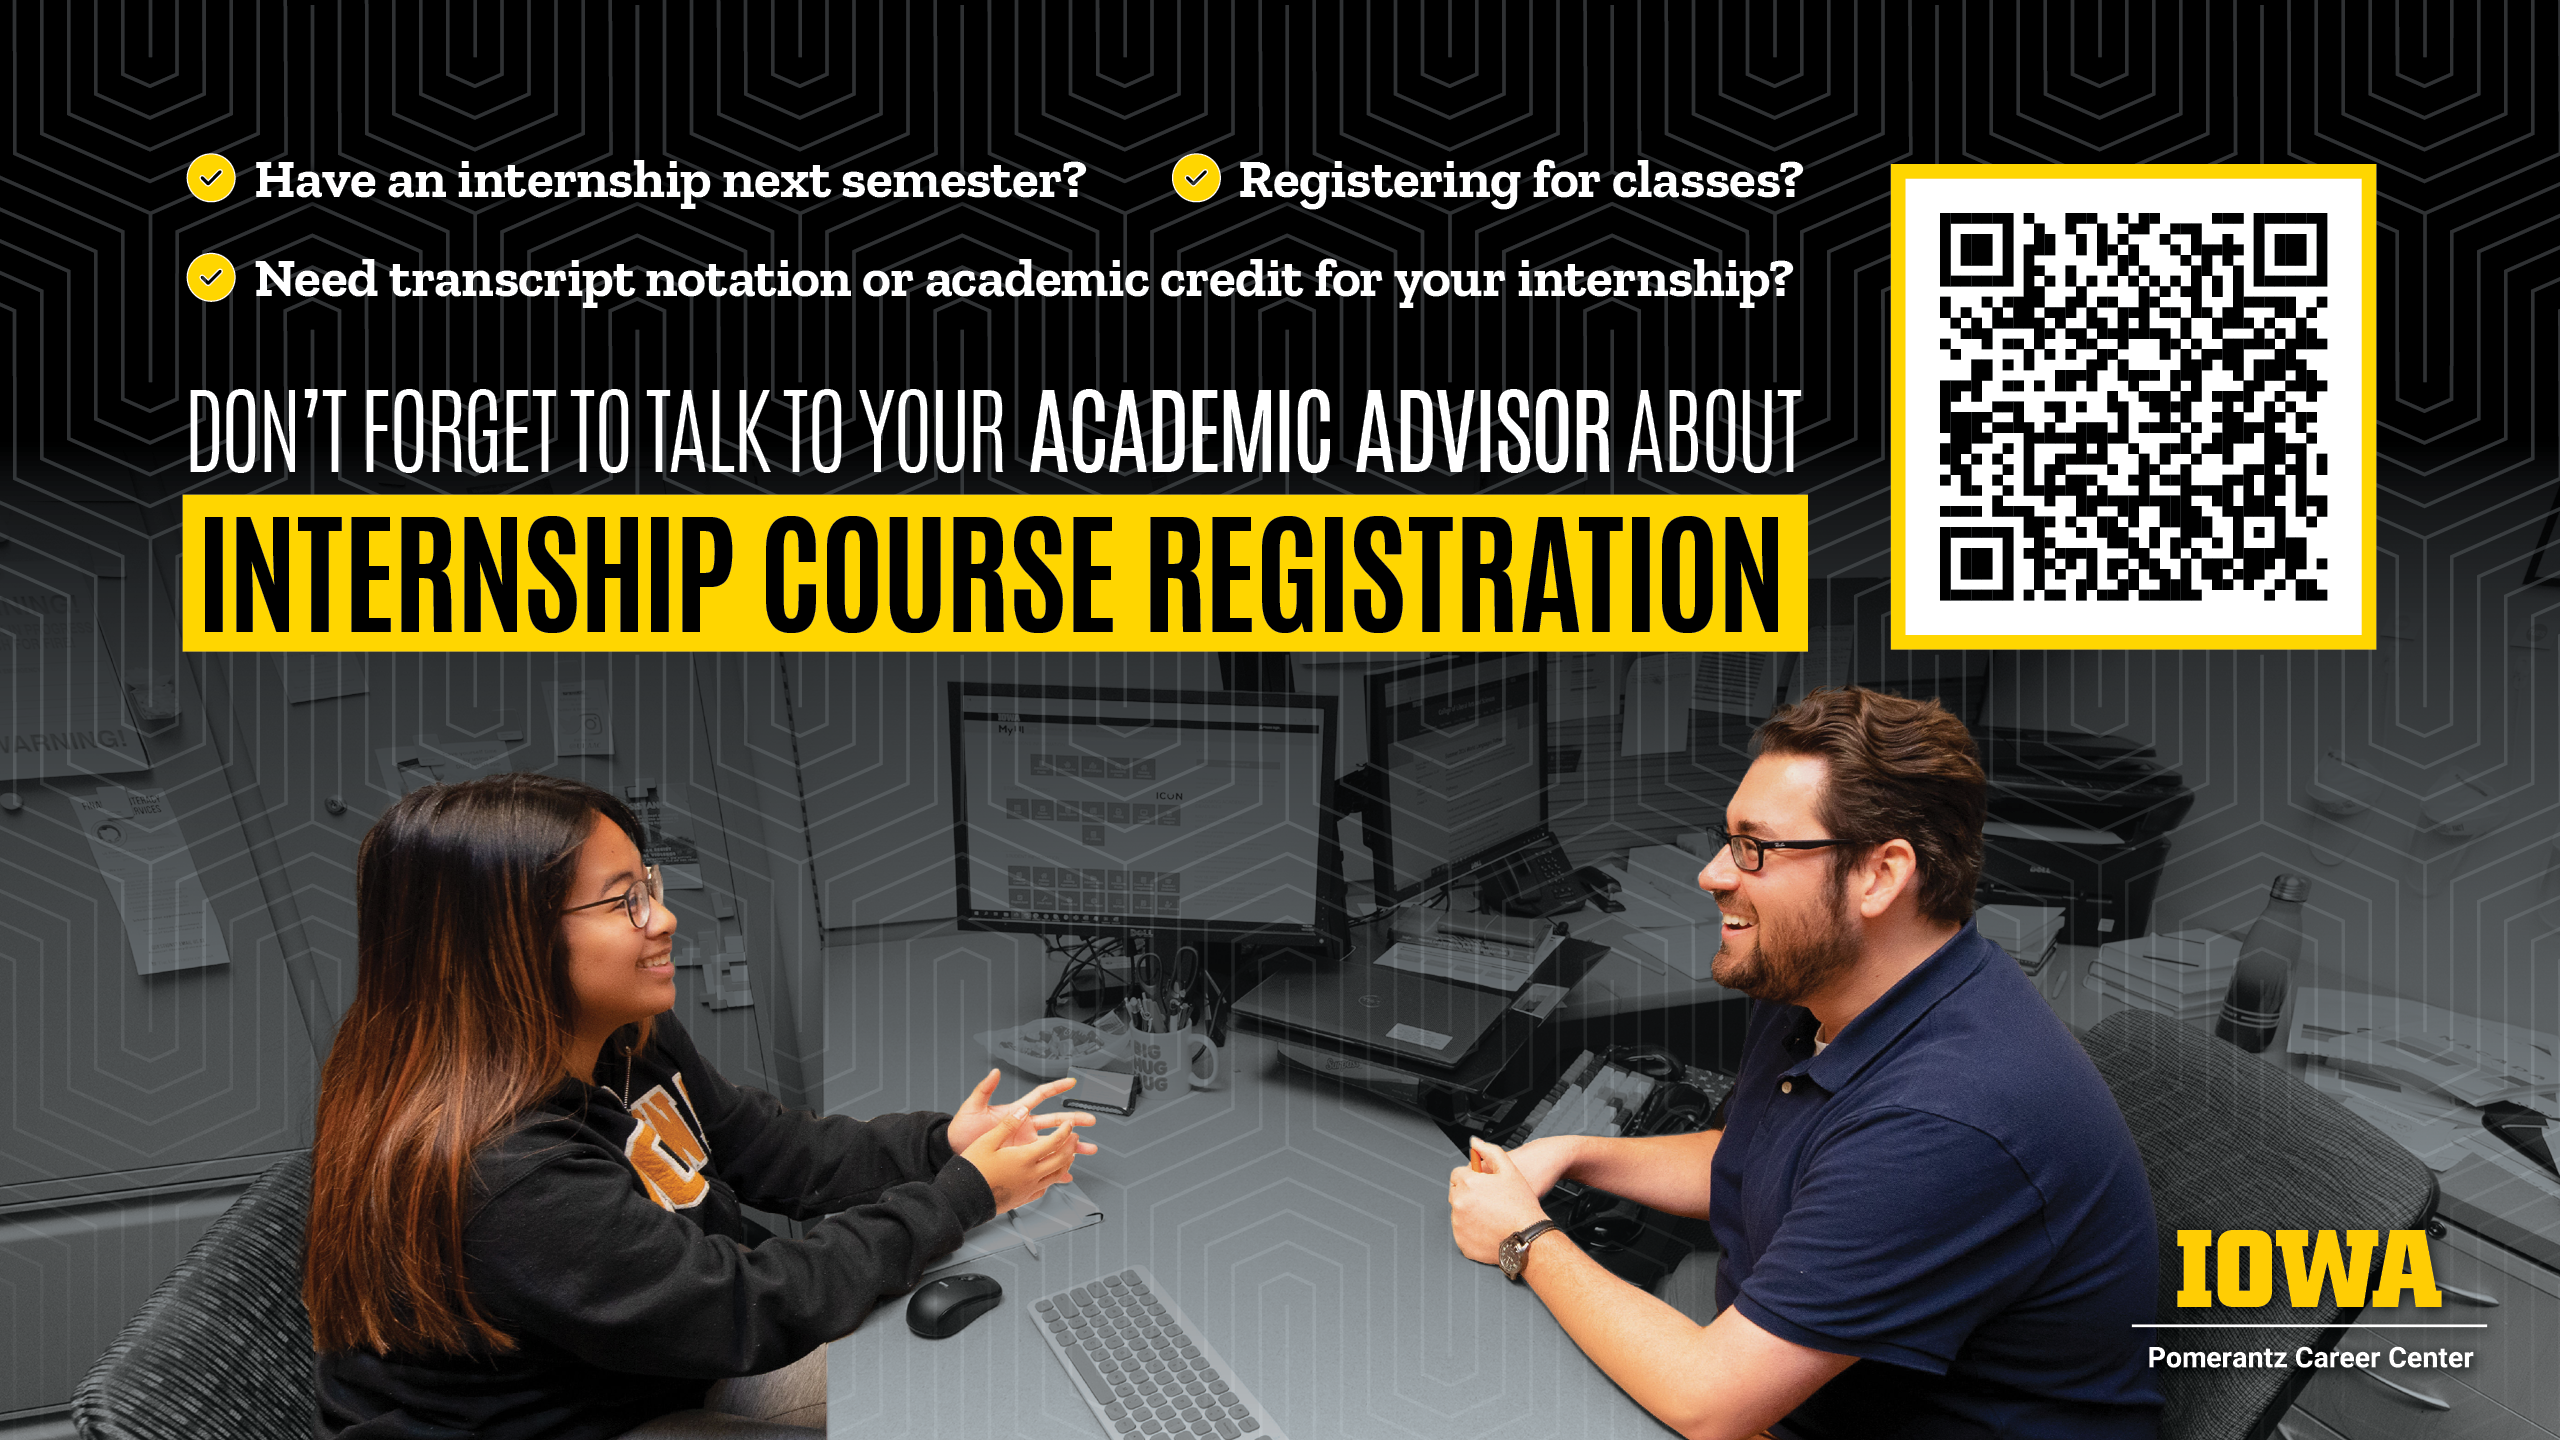 Talk to your Academic Advisor about internship course registration